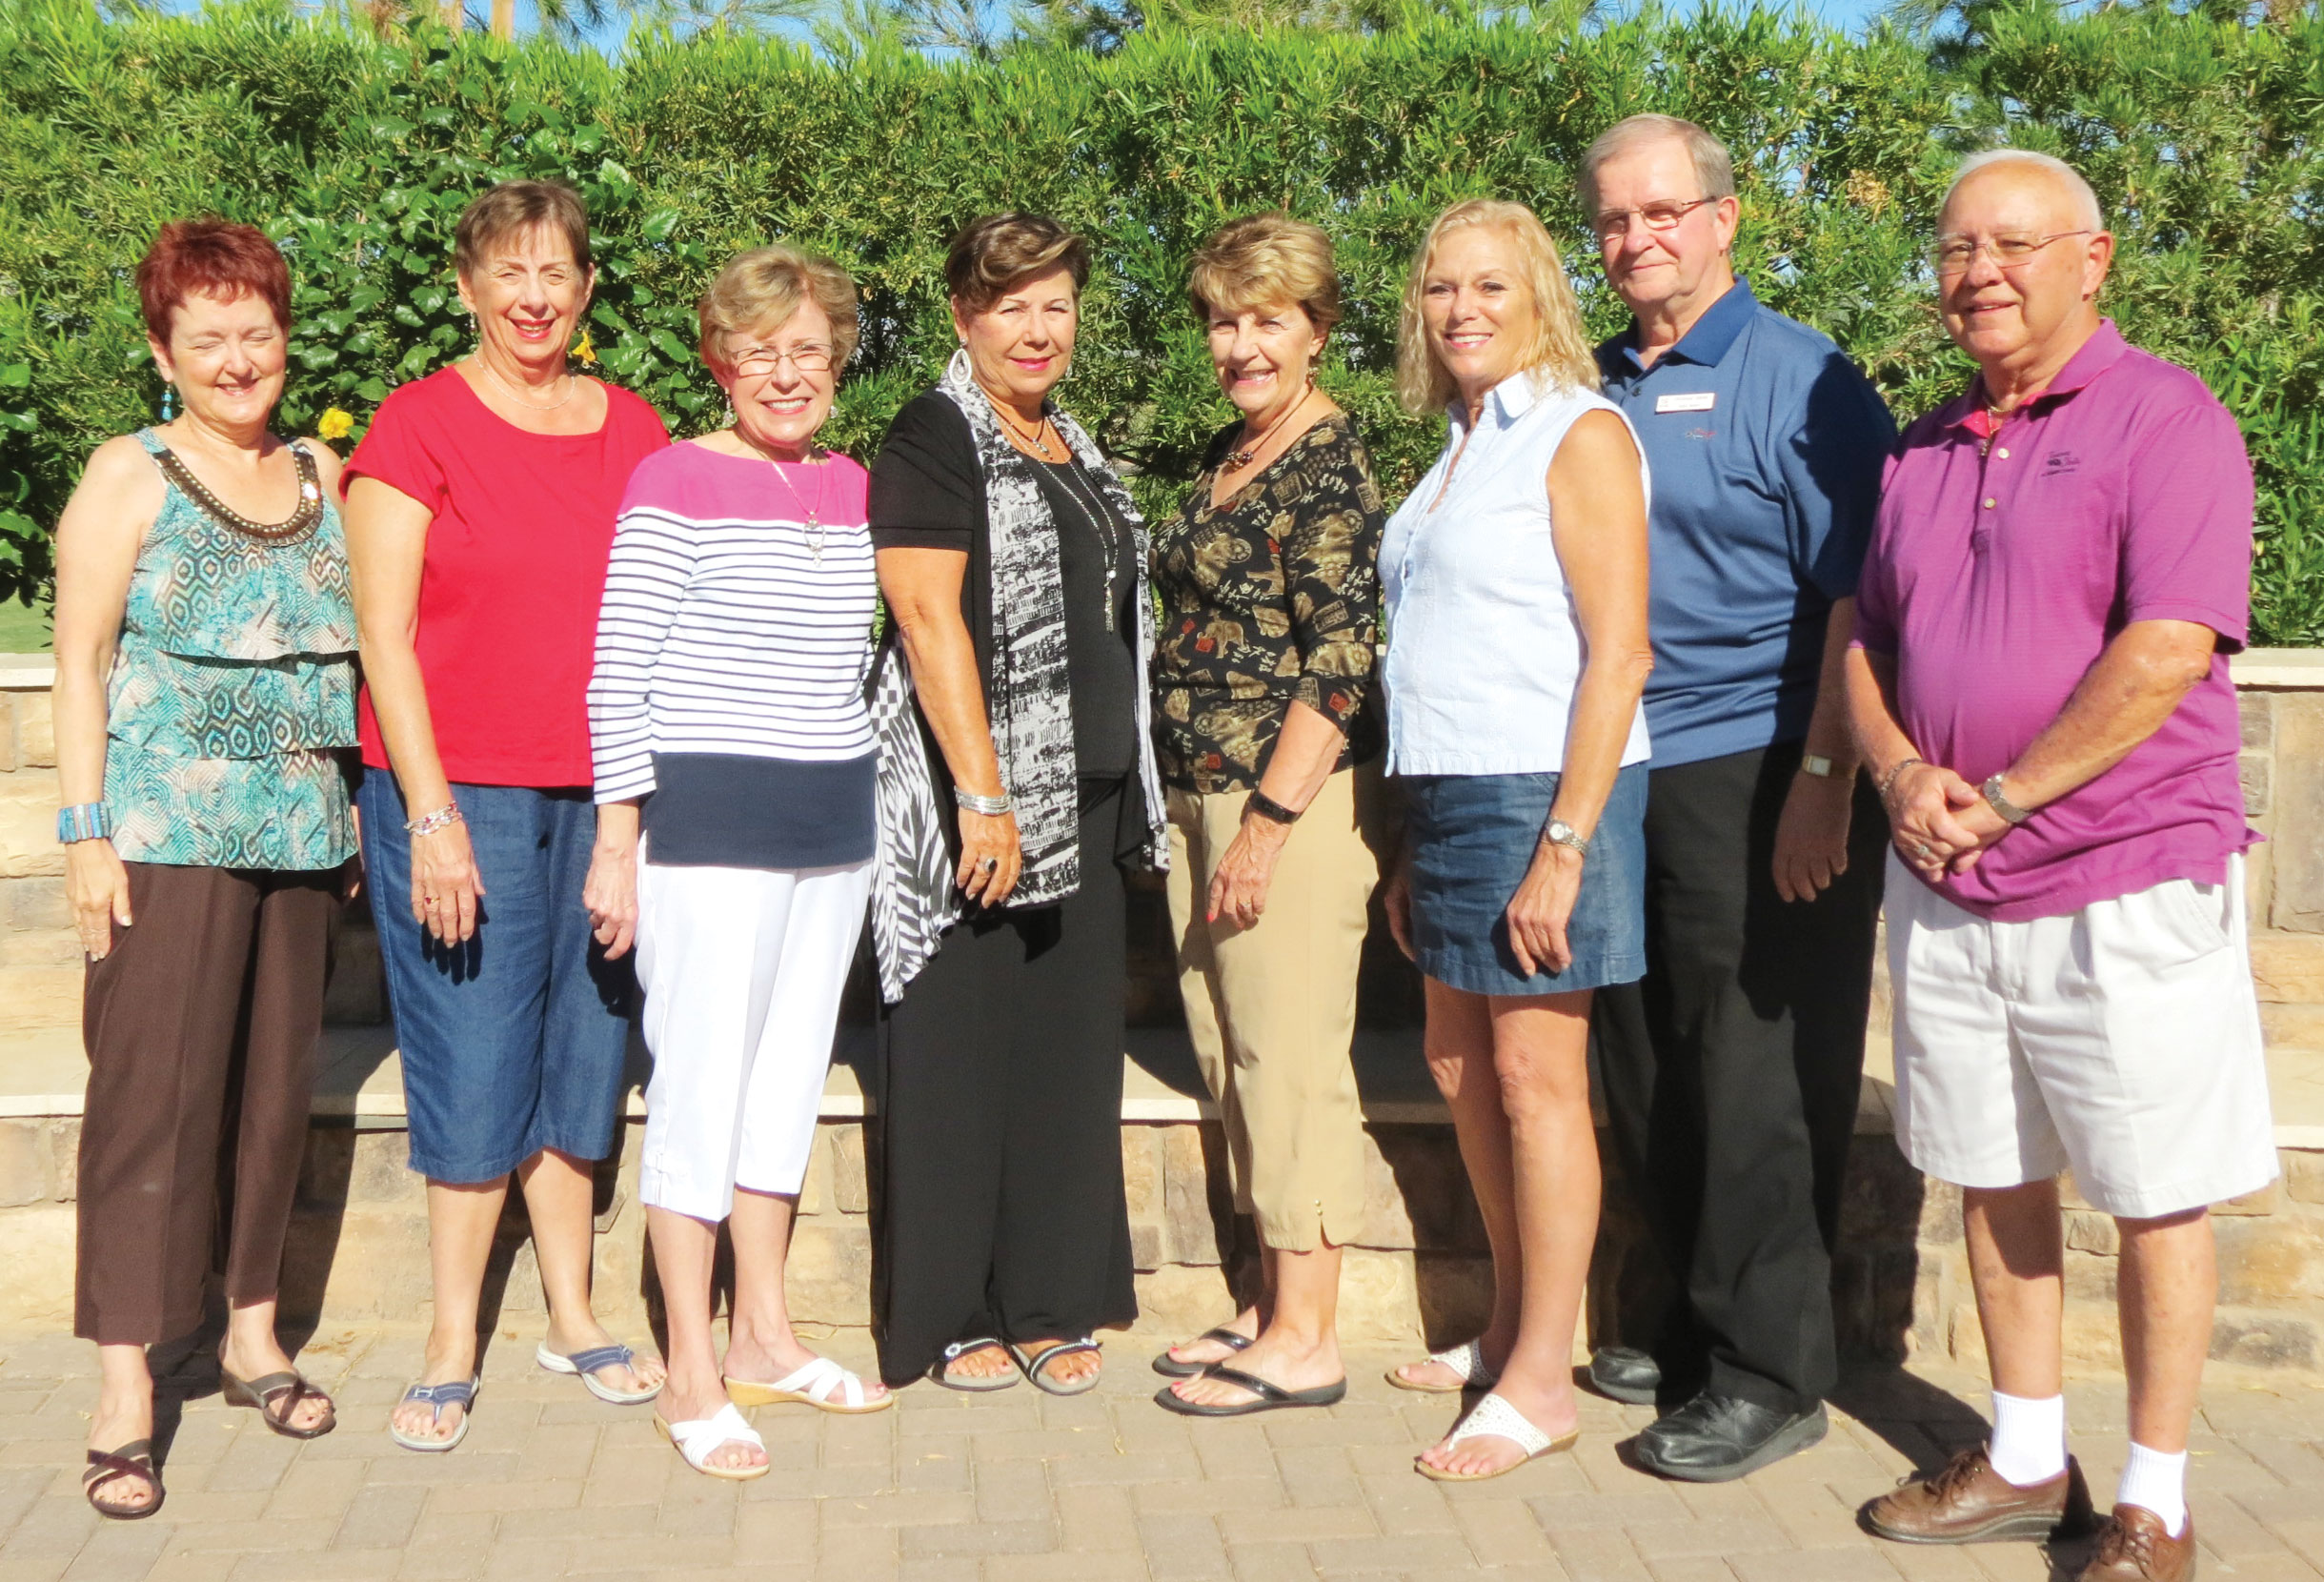 2016-2017 Kare Bears Board of Directors, left to right: Gladys Mabey, second vice president; Julie Schilling, corporation secretary; Rayma Scalzo, first vice president; Teri Sellers, program chair; Sue White, communications chair; Hilary Coltman, Health and Wellness chair; Tom Meek, president; Jim McDermott, treasurer